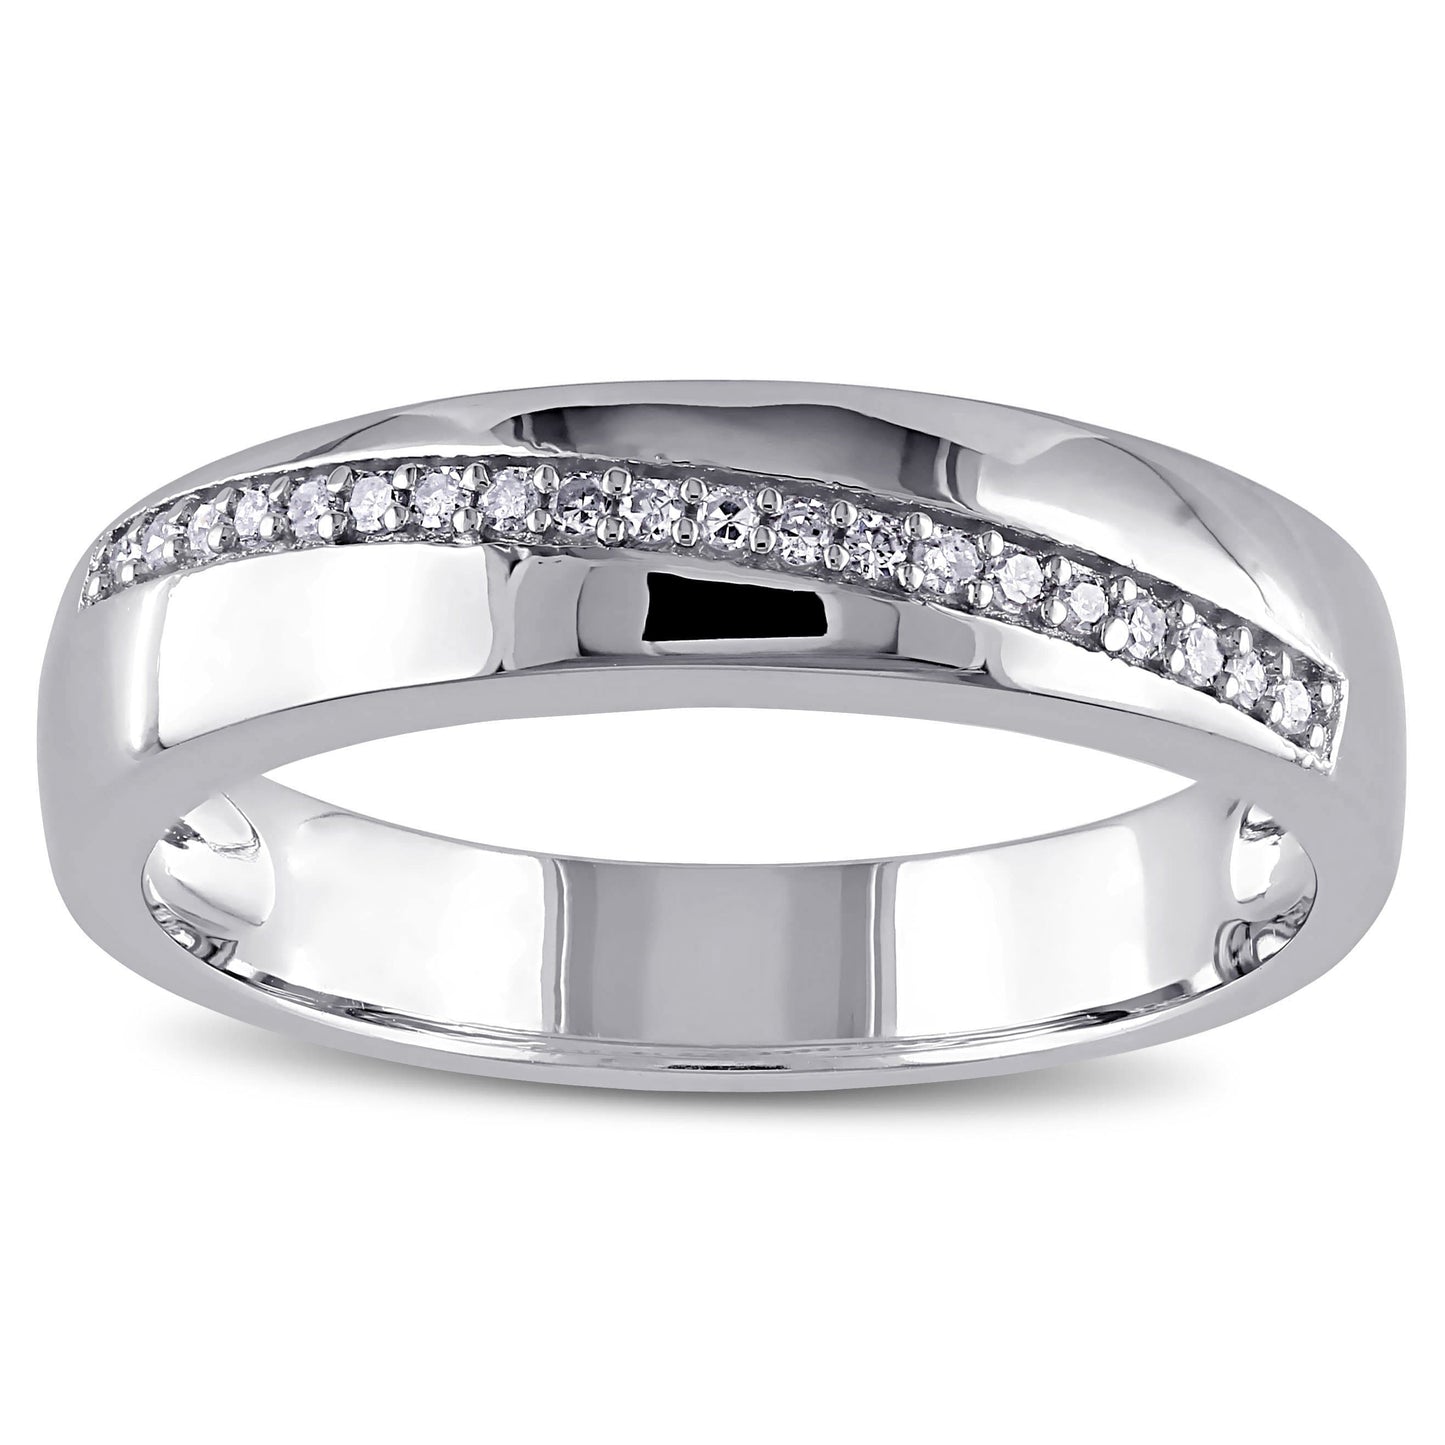 1/10ct Diamond Mens Ring in Sterling Silver